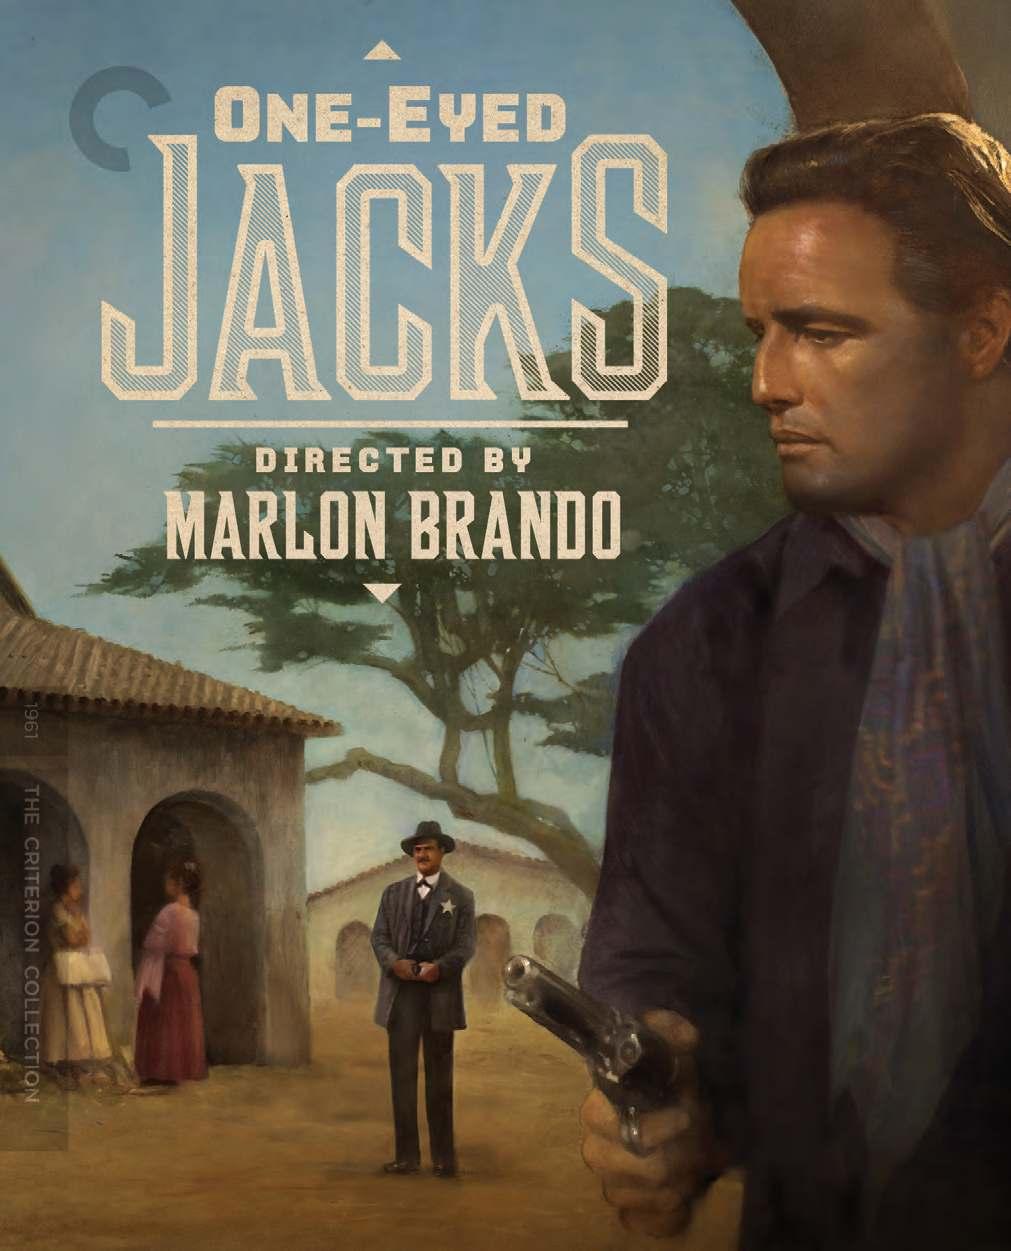 Marlon Brando s Only Stint as Director, a Stunning Take on the American Western in a Brand New 4K Restoration!